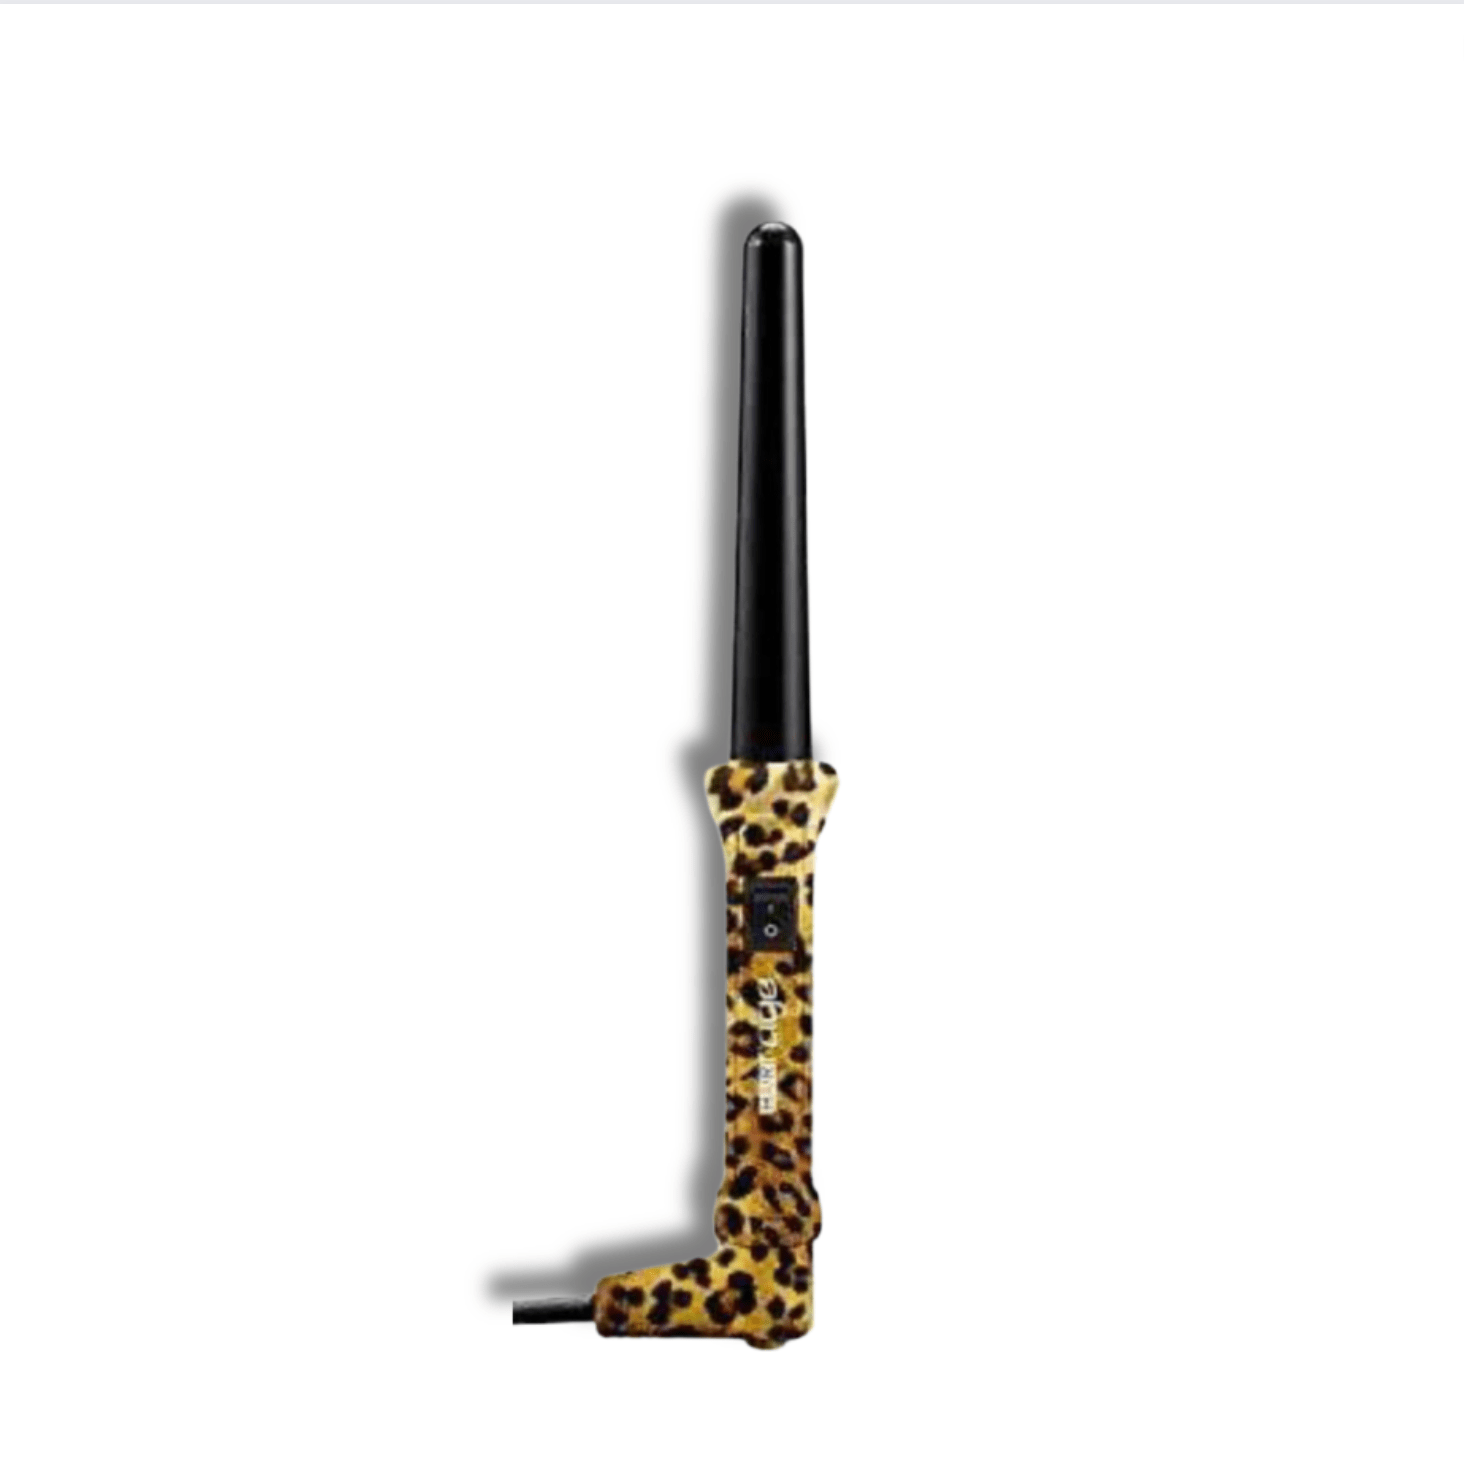 Hair Rage Safari Collection 1&quot; Tourmaline Infused Ceramic Barrel Curling Wand